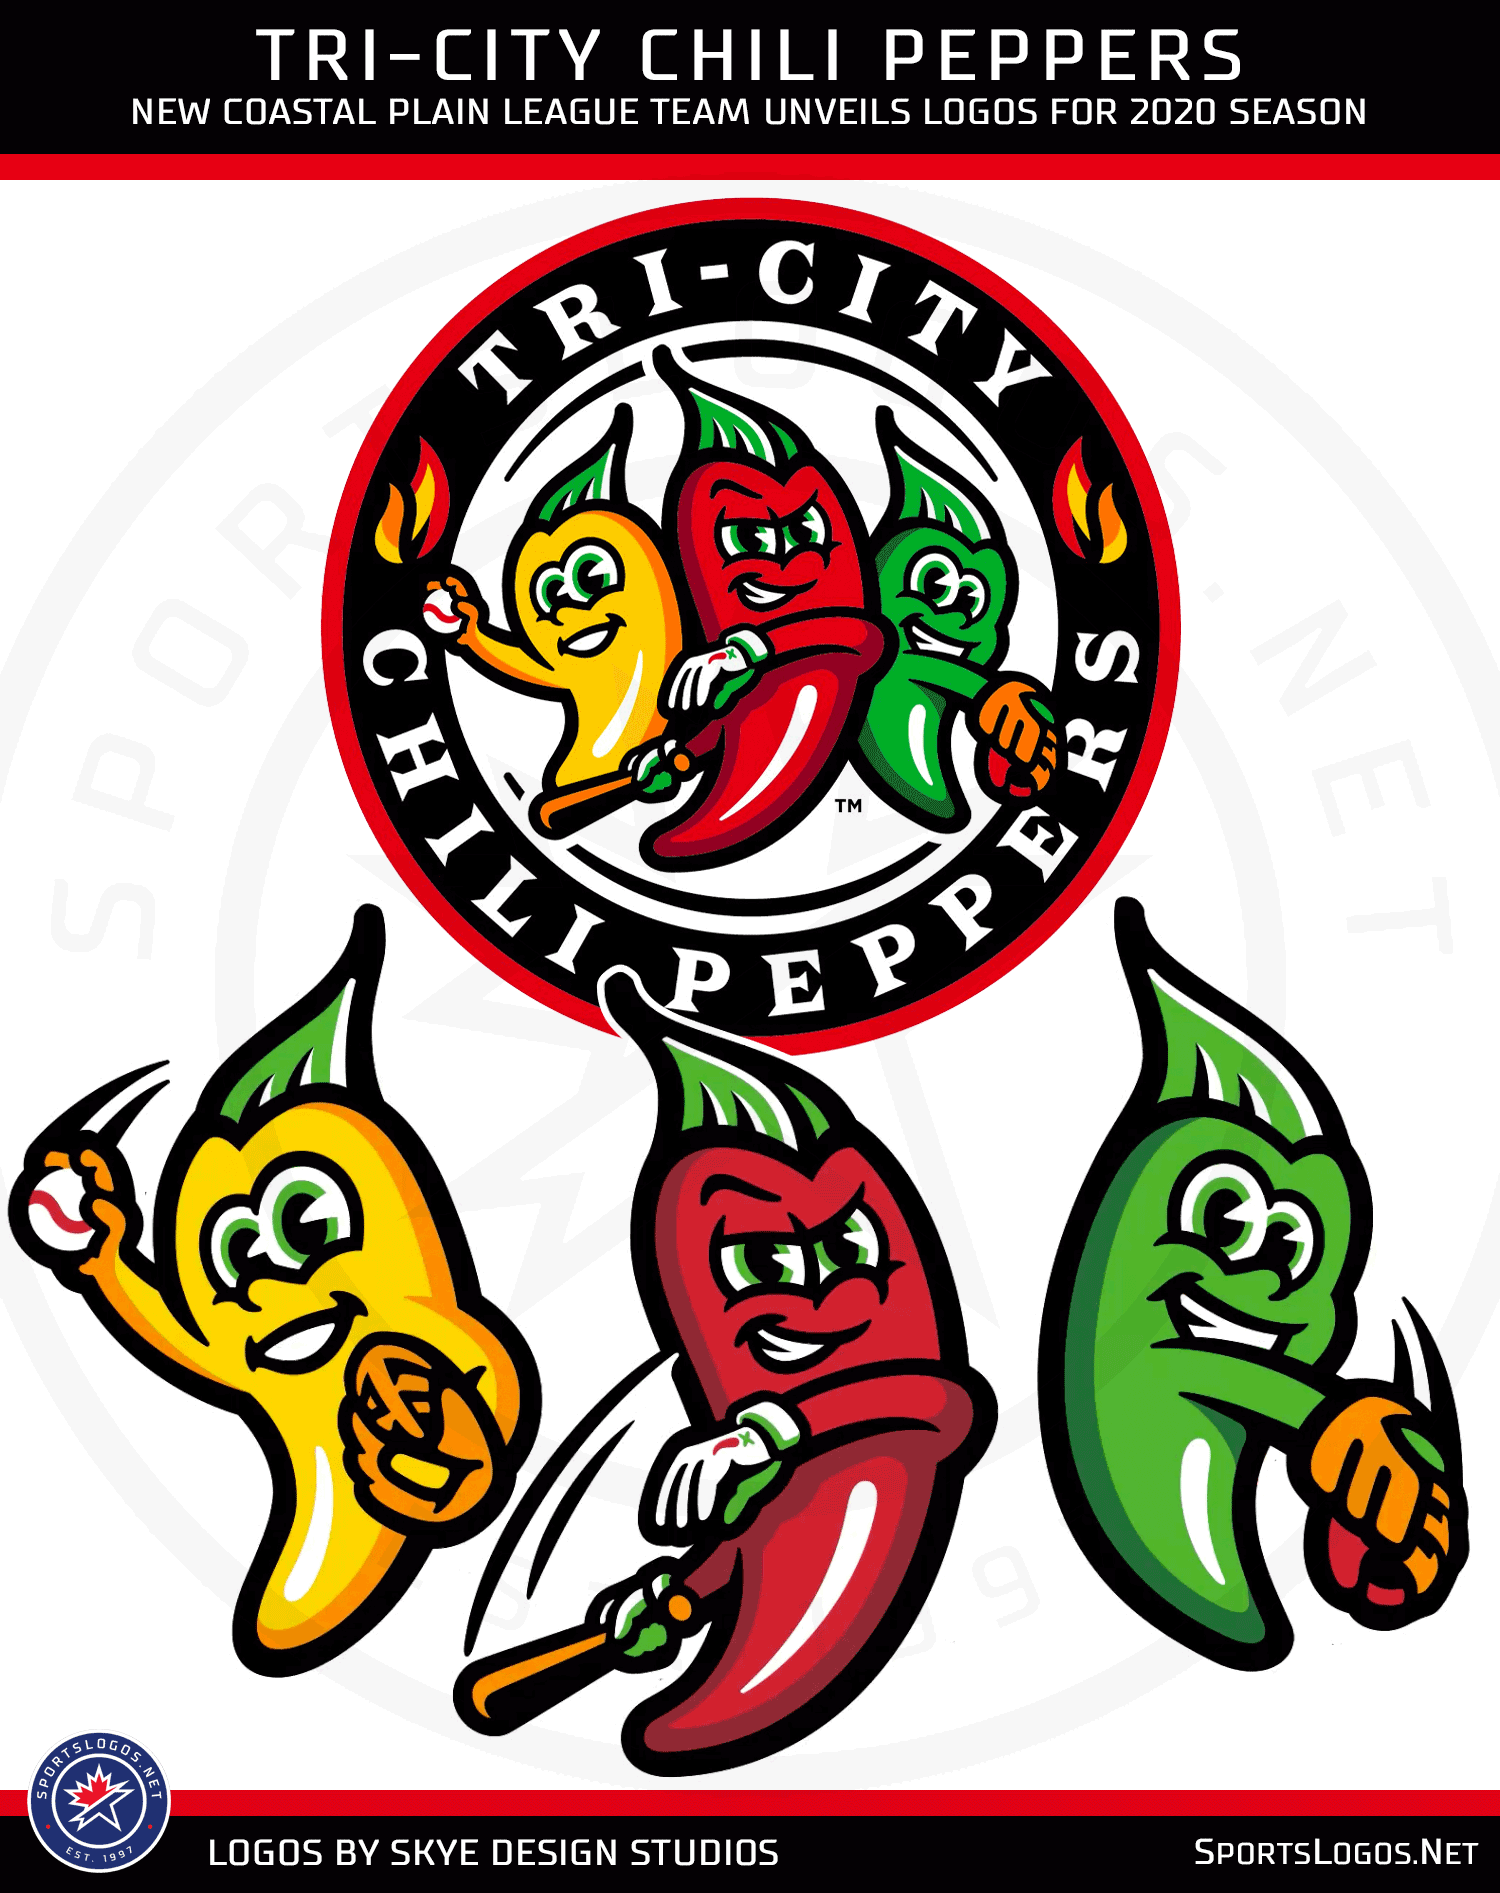 TriCity Chili Peppers Unveil Spicy New Logos for 2020 SportsLogos